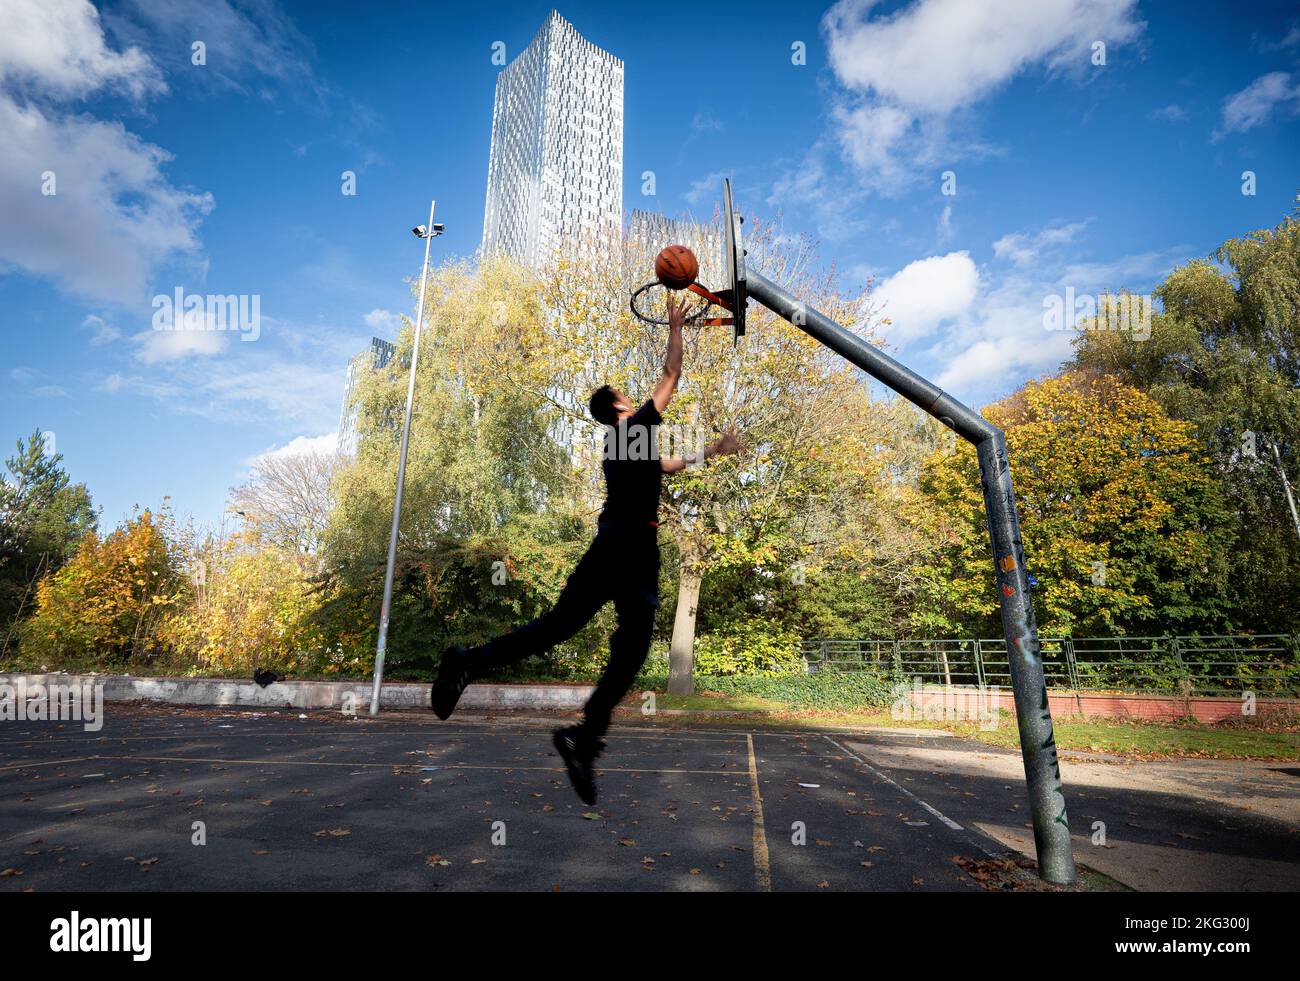 Young man jumps playing basketball Hulme Park in shadow of South Tower of new city centre development. Manchester UK Picture credit garyroberts/world Stock Photo